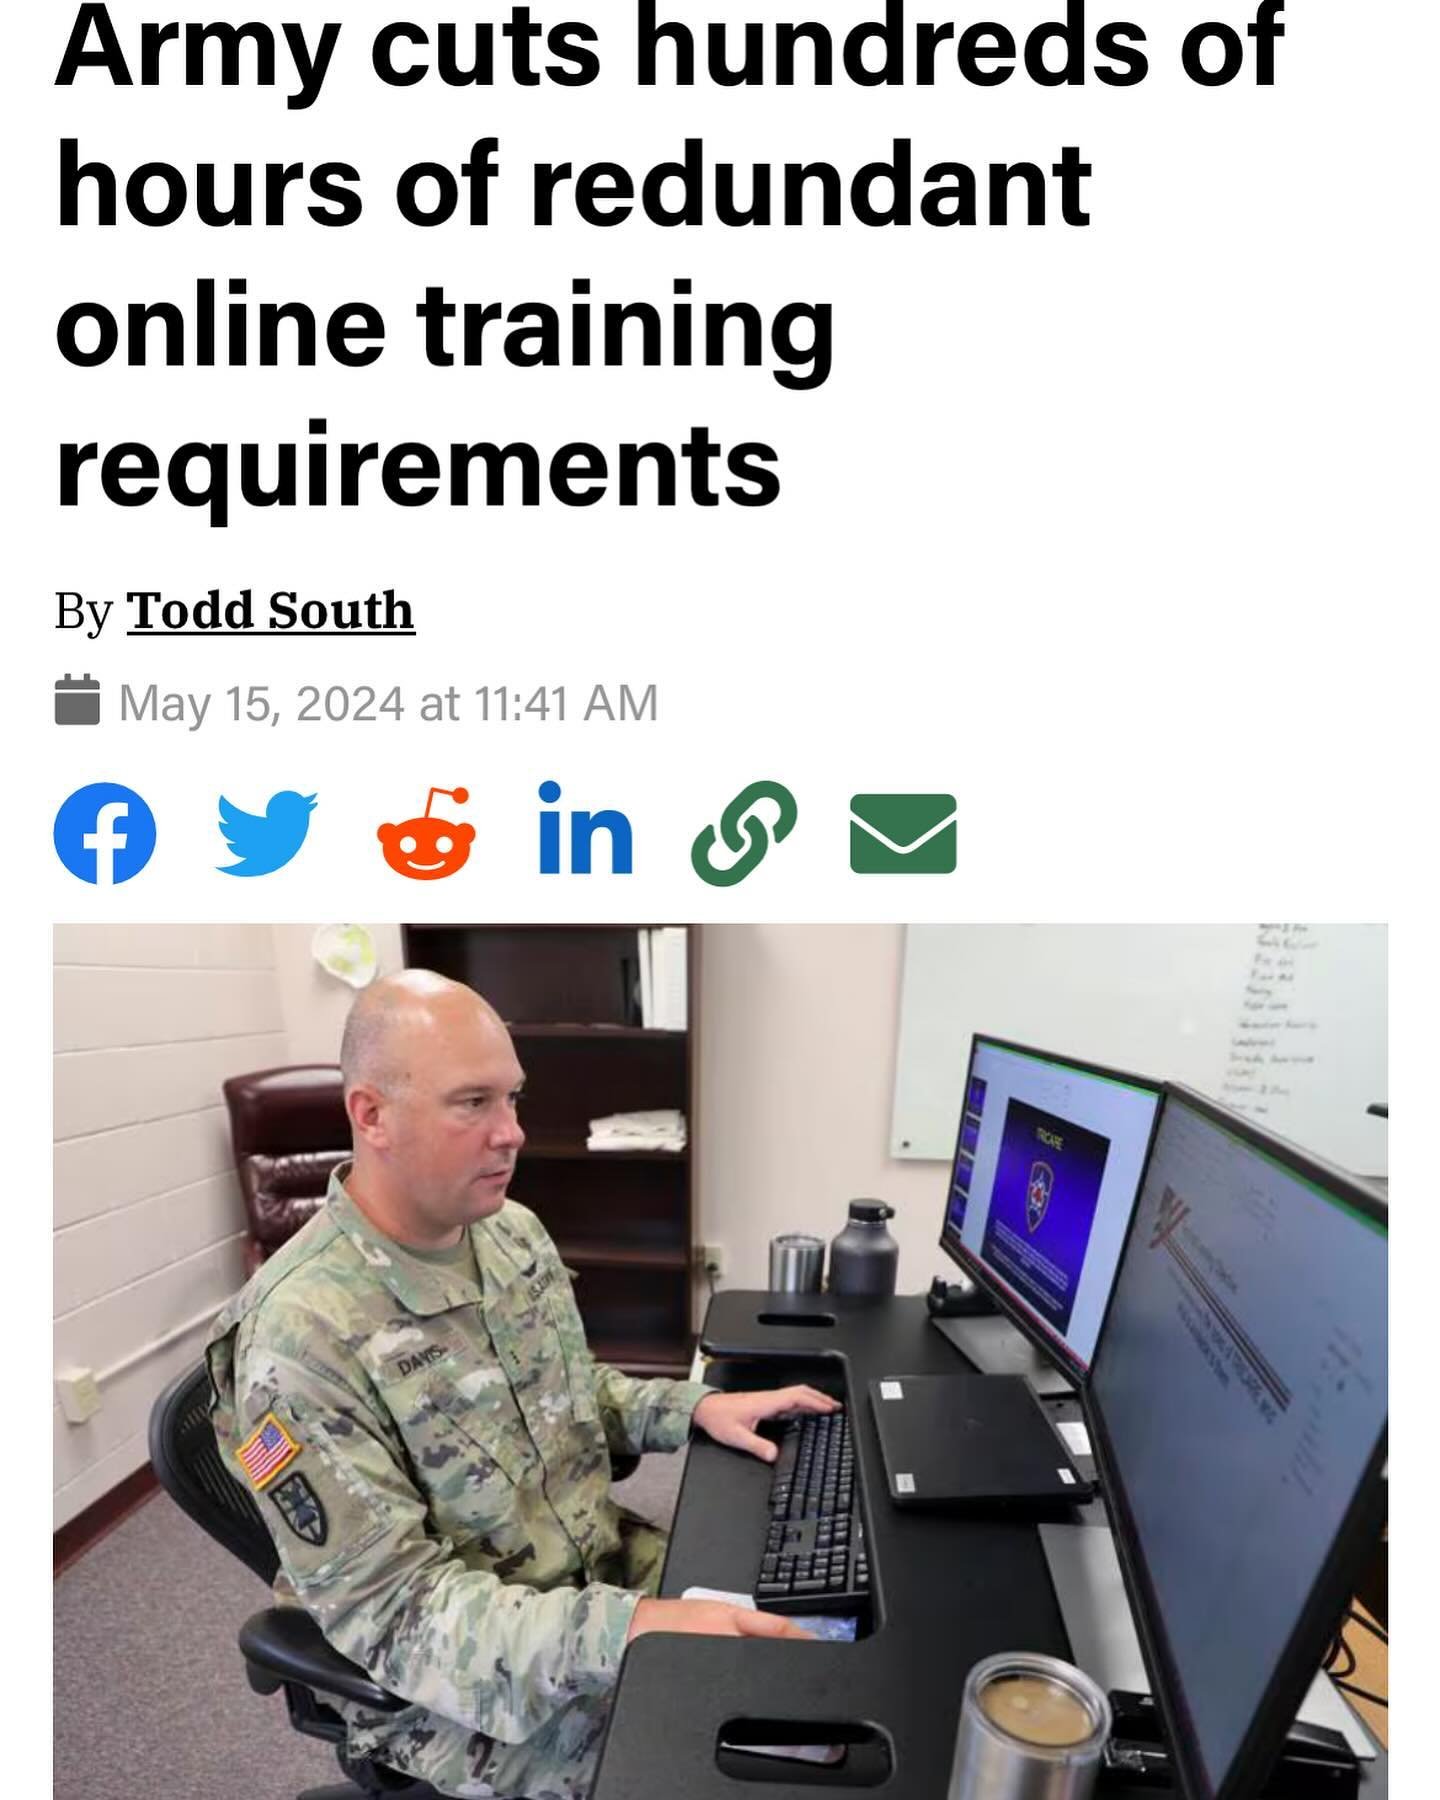 &ldquo;We are scrubbing everything we are asking our soldiers to study, because there is only so much time during the day to do your job, for your personal development, and for your family,&rdquo; Weimer told Army Times in an emailed statement.
The s